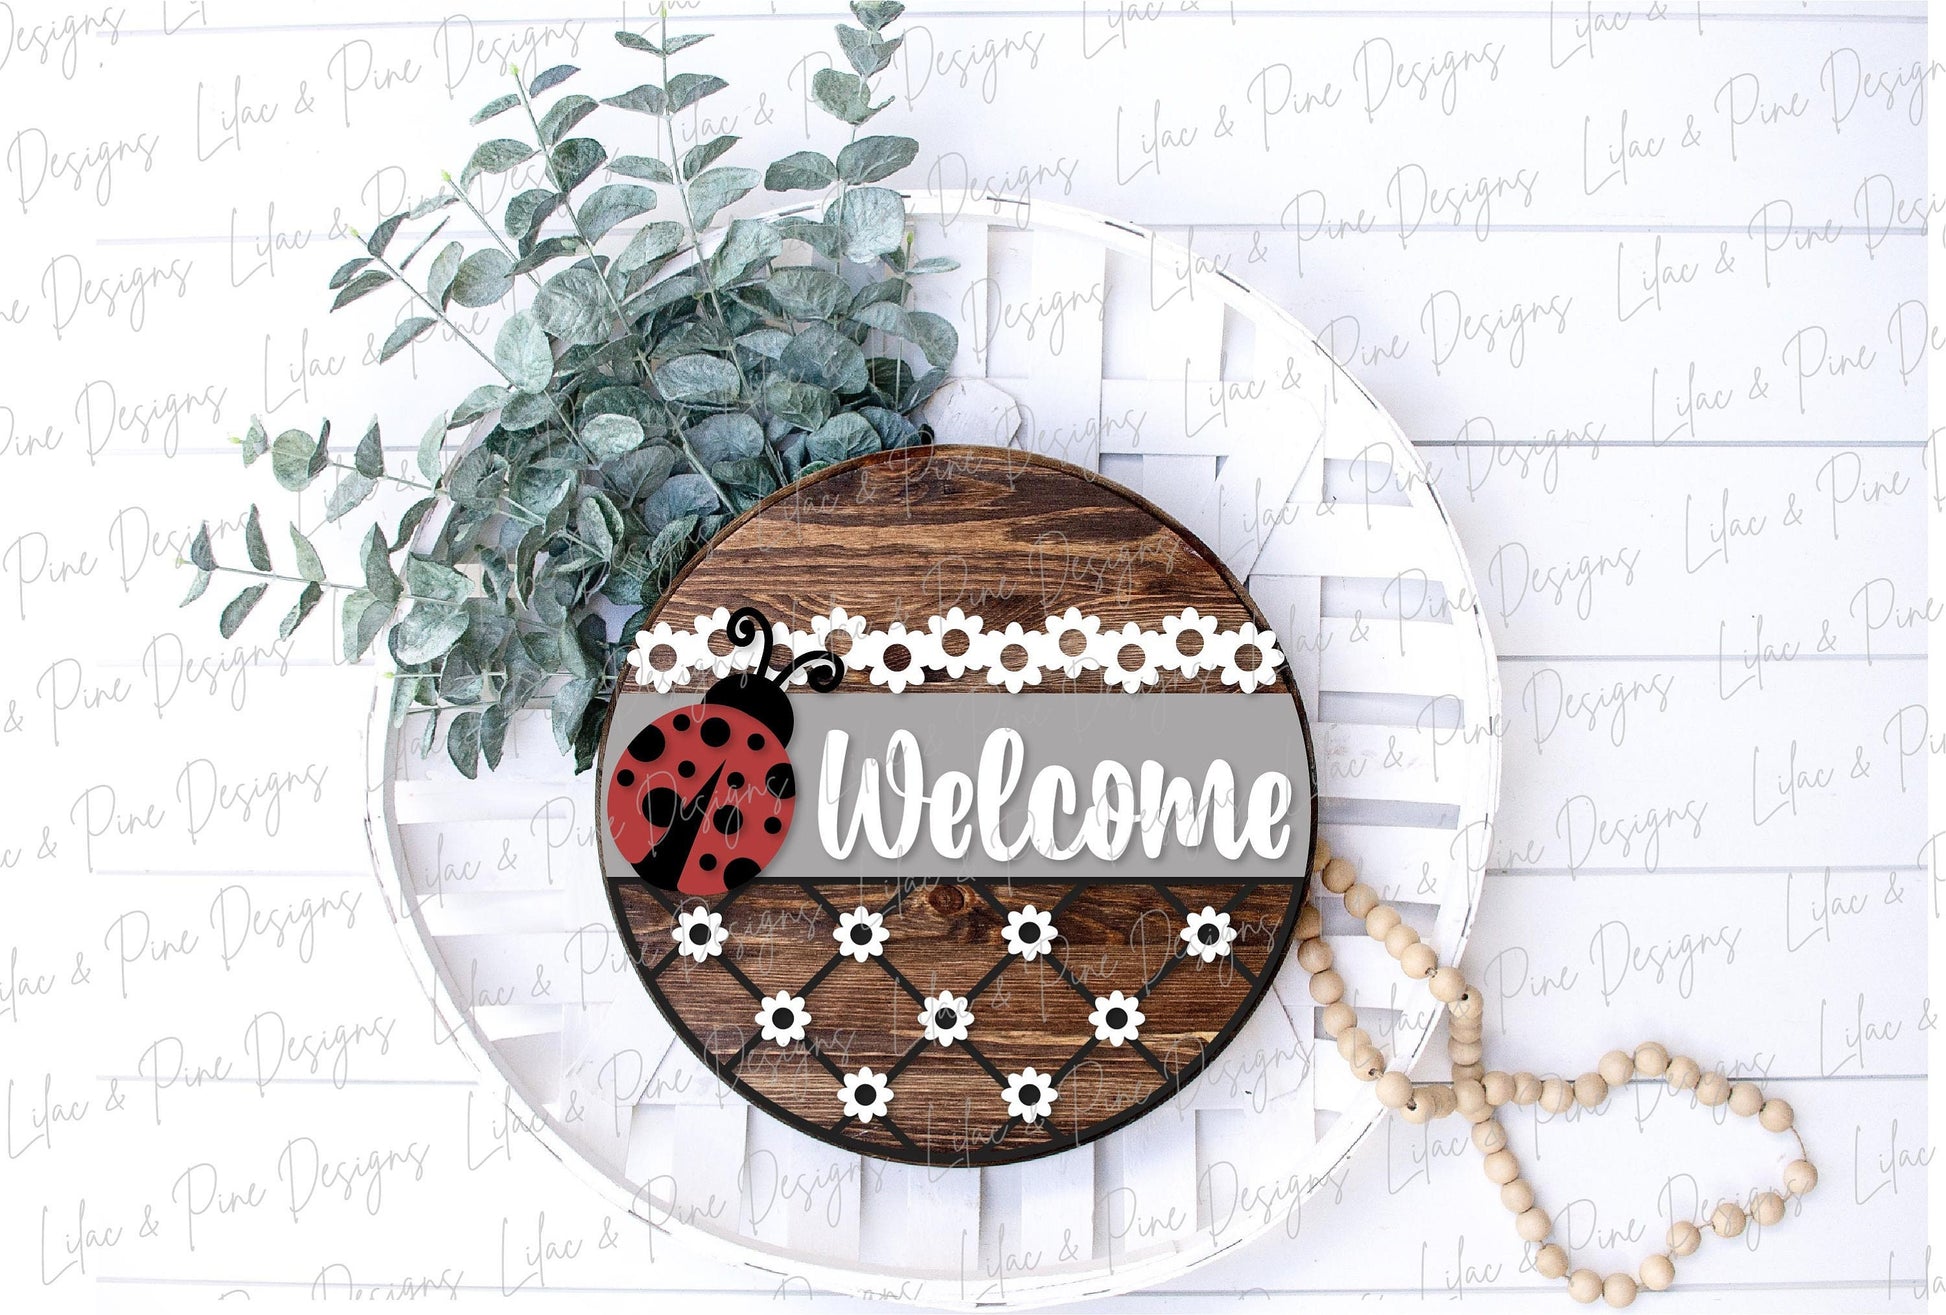 Ladybug Welcome door hanger SVG, Daisy Welcome sign, plaid and daisy svg, Ladybug sign, Summer decor, Glowforge cut file, laser SVG file